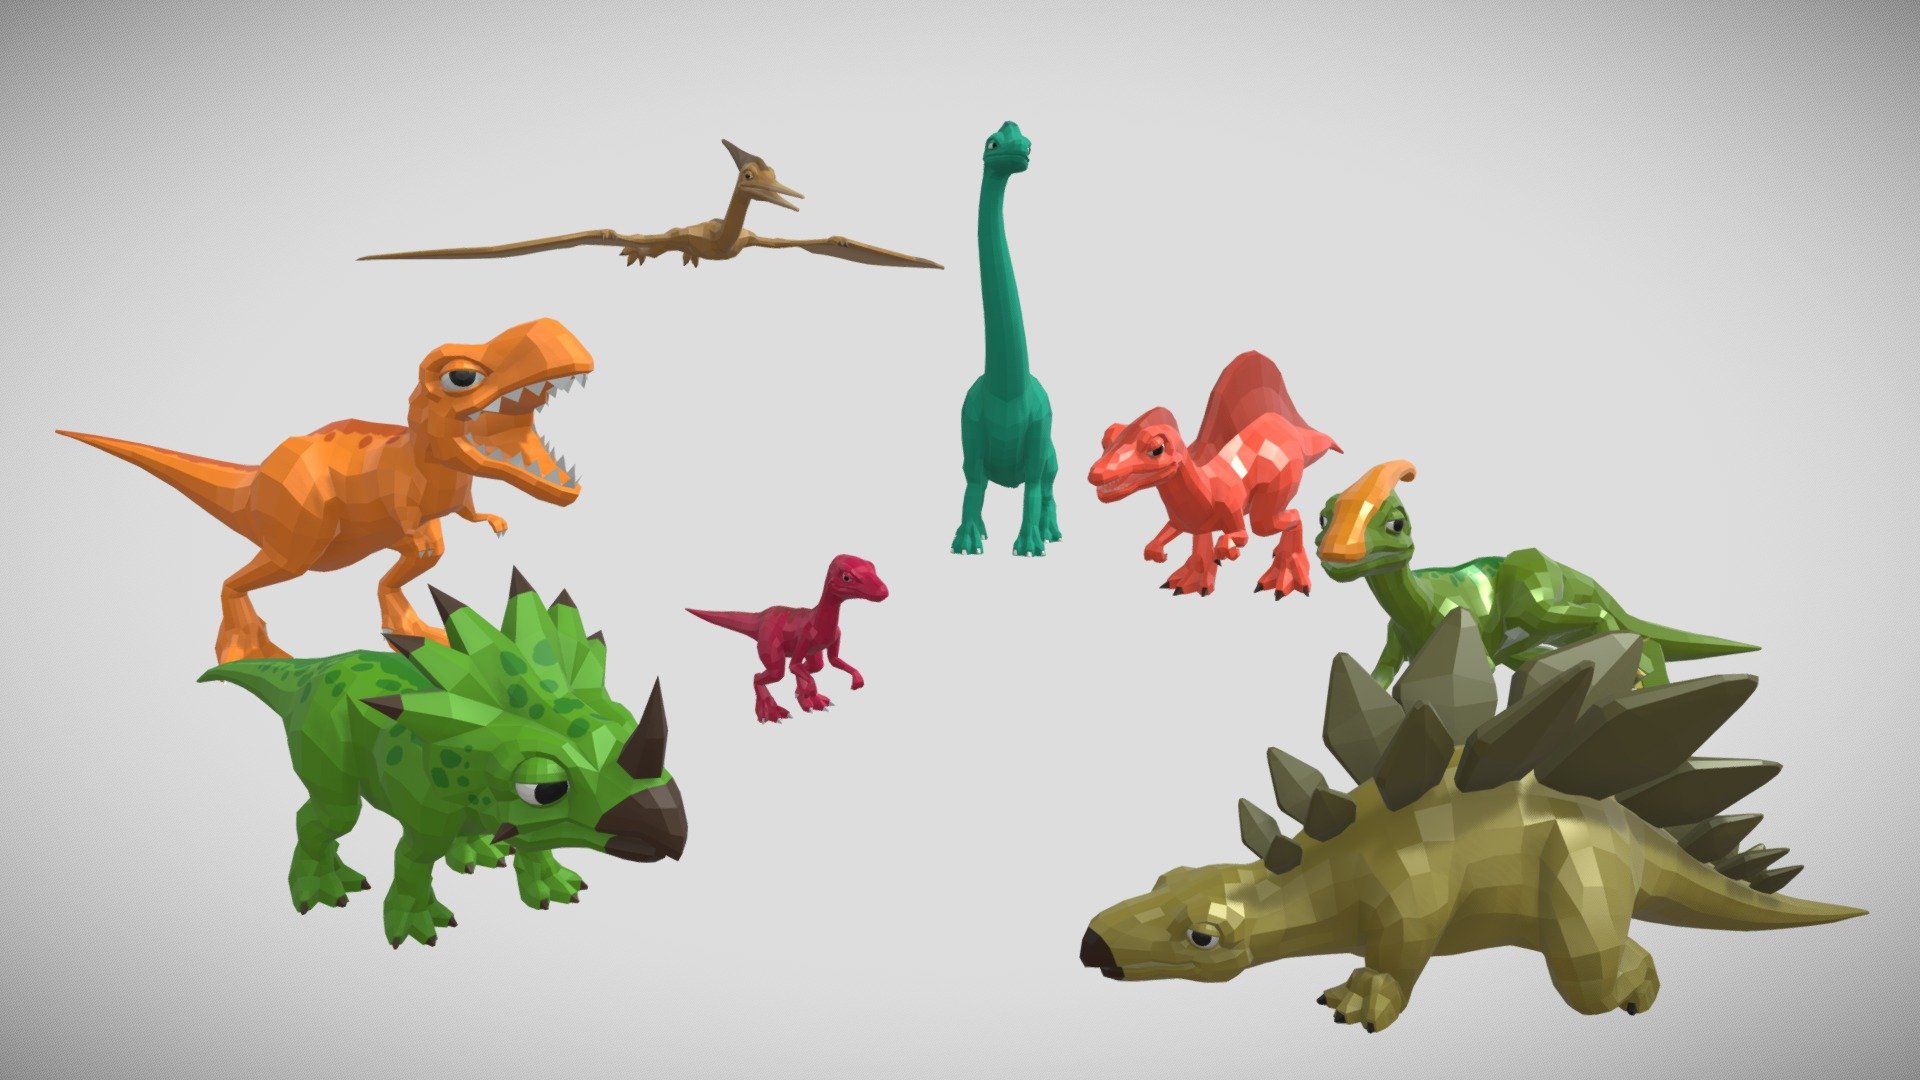 Demo video: https://youtu.be/JlQLjxGMny4

Contents




8 fully rigged dinosaurs

Various animations for each dinosaur

Cute and easy-to-use design

Animations




Brachiosaurus: Idle01, Idle02, Sit, Stand, Walk

Parasaurolophus: Idle, MIsstep, Sit, Stand, Walk

Pterosaurs: Fly, Walk

Spinosaurus: Idle, LookAround, Walk

Stegosaurus: Eat, Idle, Sit, Stand, Walk

Styracosaurus: Attack, Idle, Walk

Tyrannosaurus: Growling, Idle, Walk

Velociraptor: Idle, Run, Touch, Walk

A blender file of each dinosaur's included. You can use the rig, create and adjust animations as you like.

Thank you so much for your interest. Our goal is to create assets that are useful and practical for your project! If you have any question or suggestion, please send us an email to customersupport@jiffycrew.com. We'll be more than happy to help 3d model